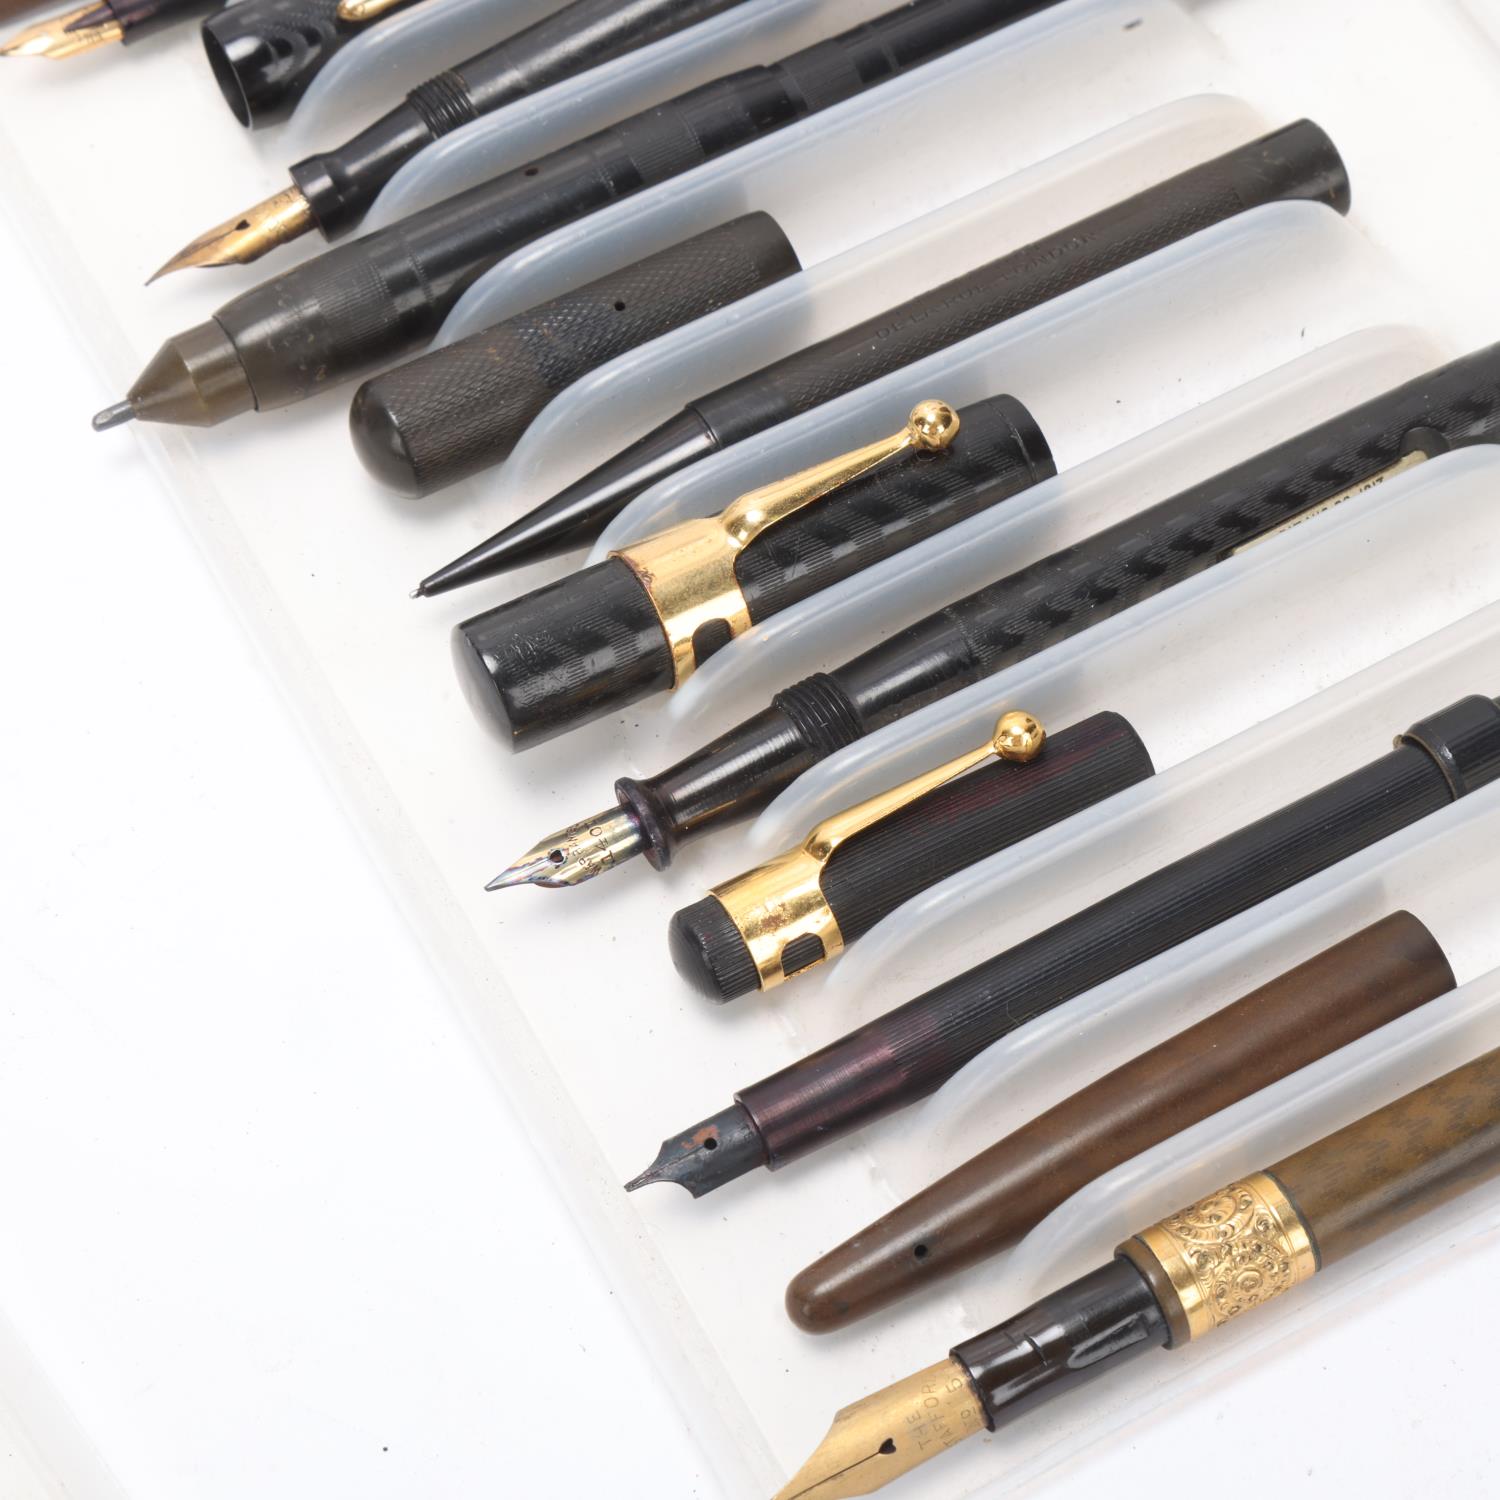 7 early 20th century fountain pens, including eye dropper models and others, The Stafford Pen, - Image 2 of 4